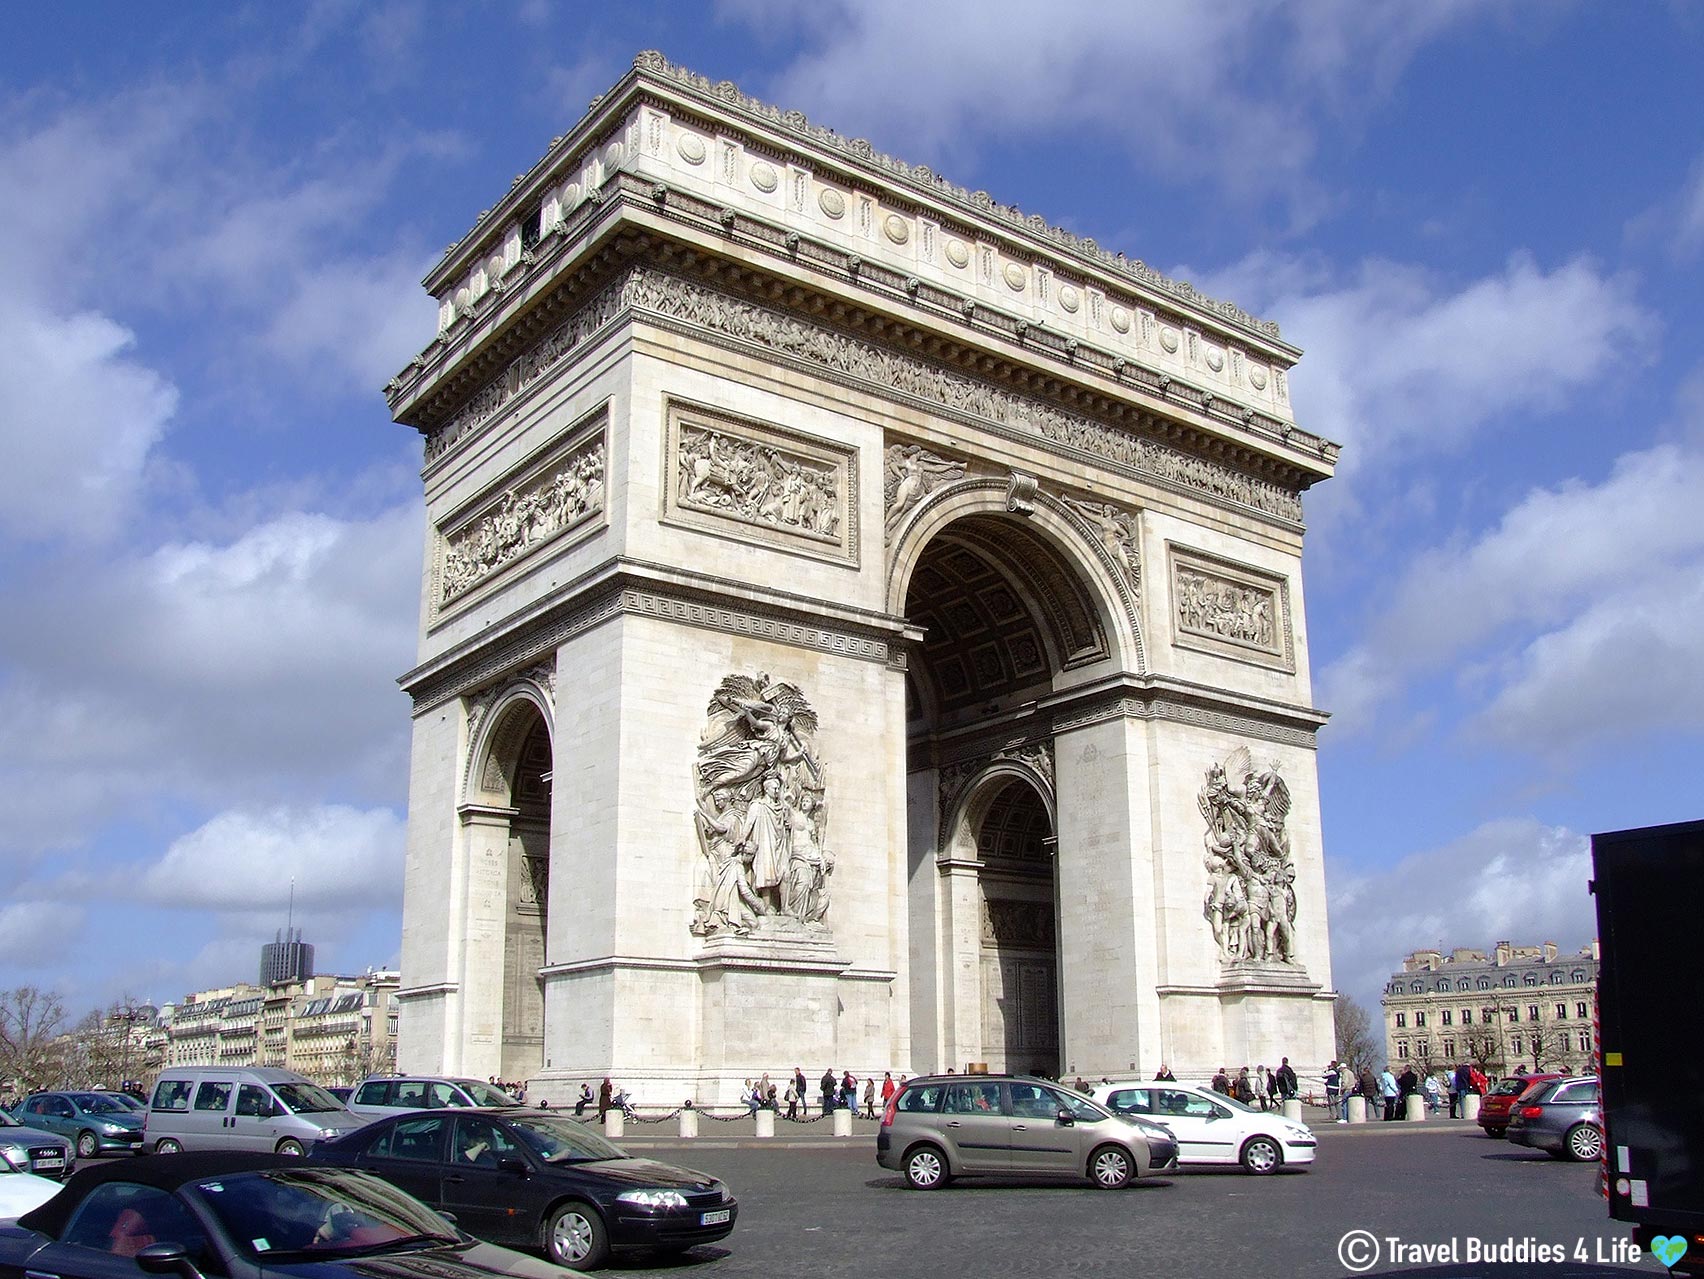 The French Monument Of The Arc De Triomphe In Paris, France, Europe